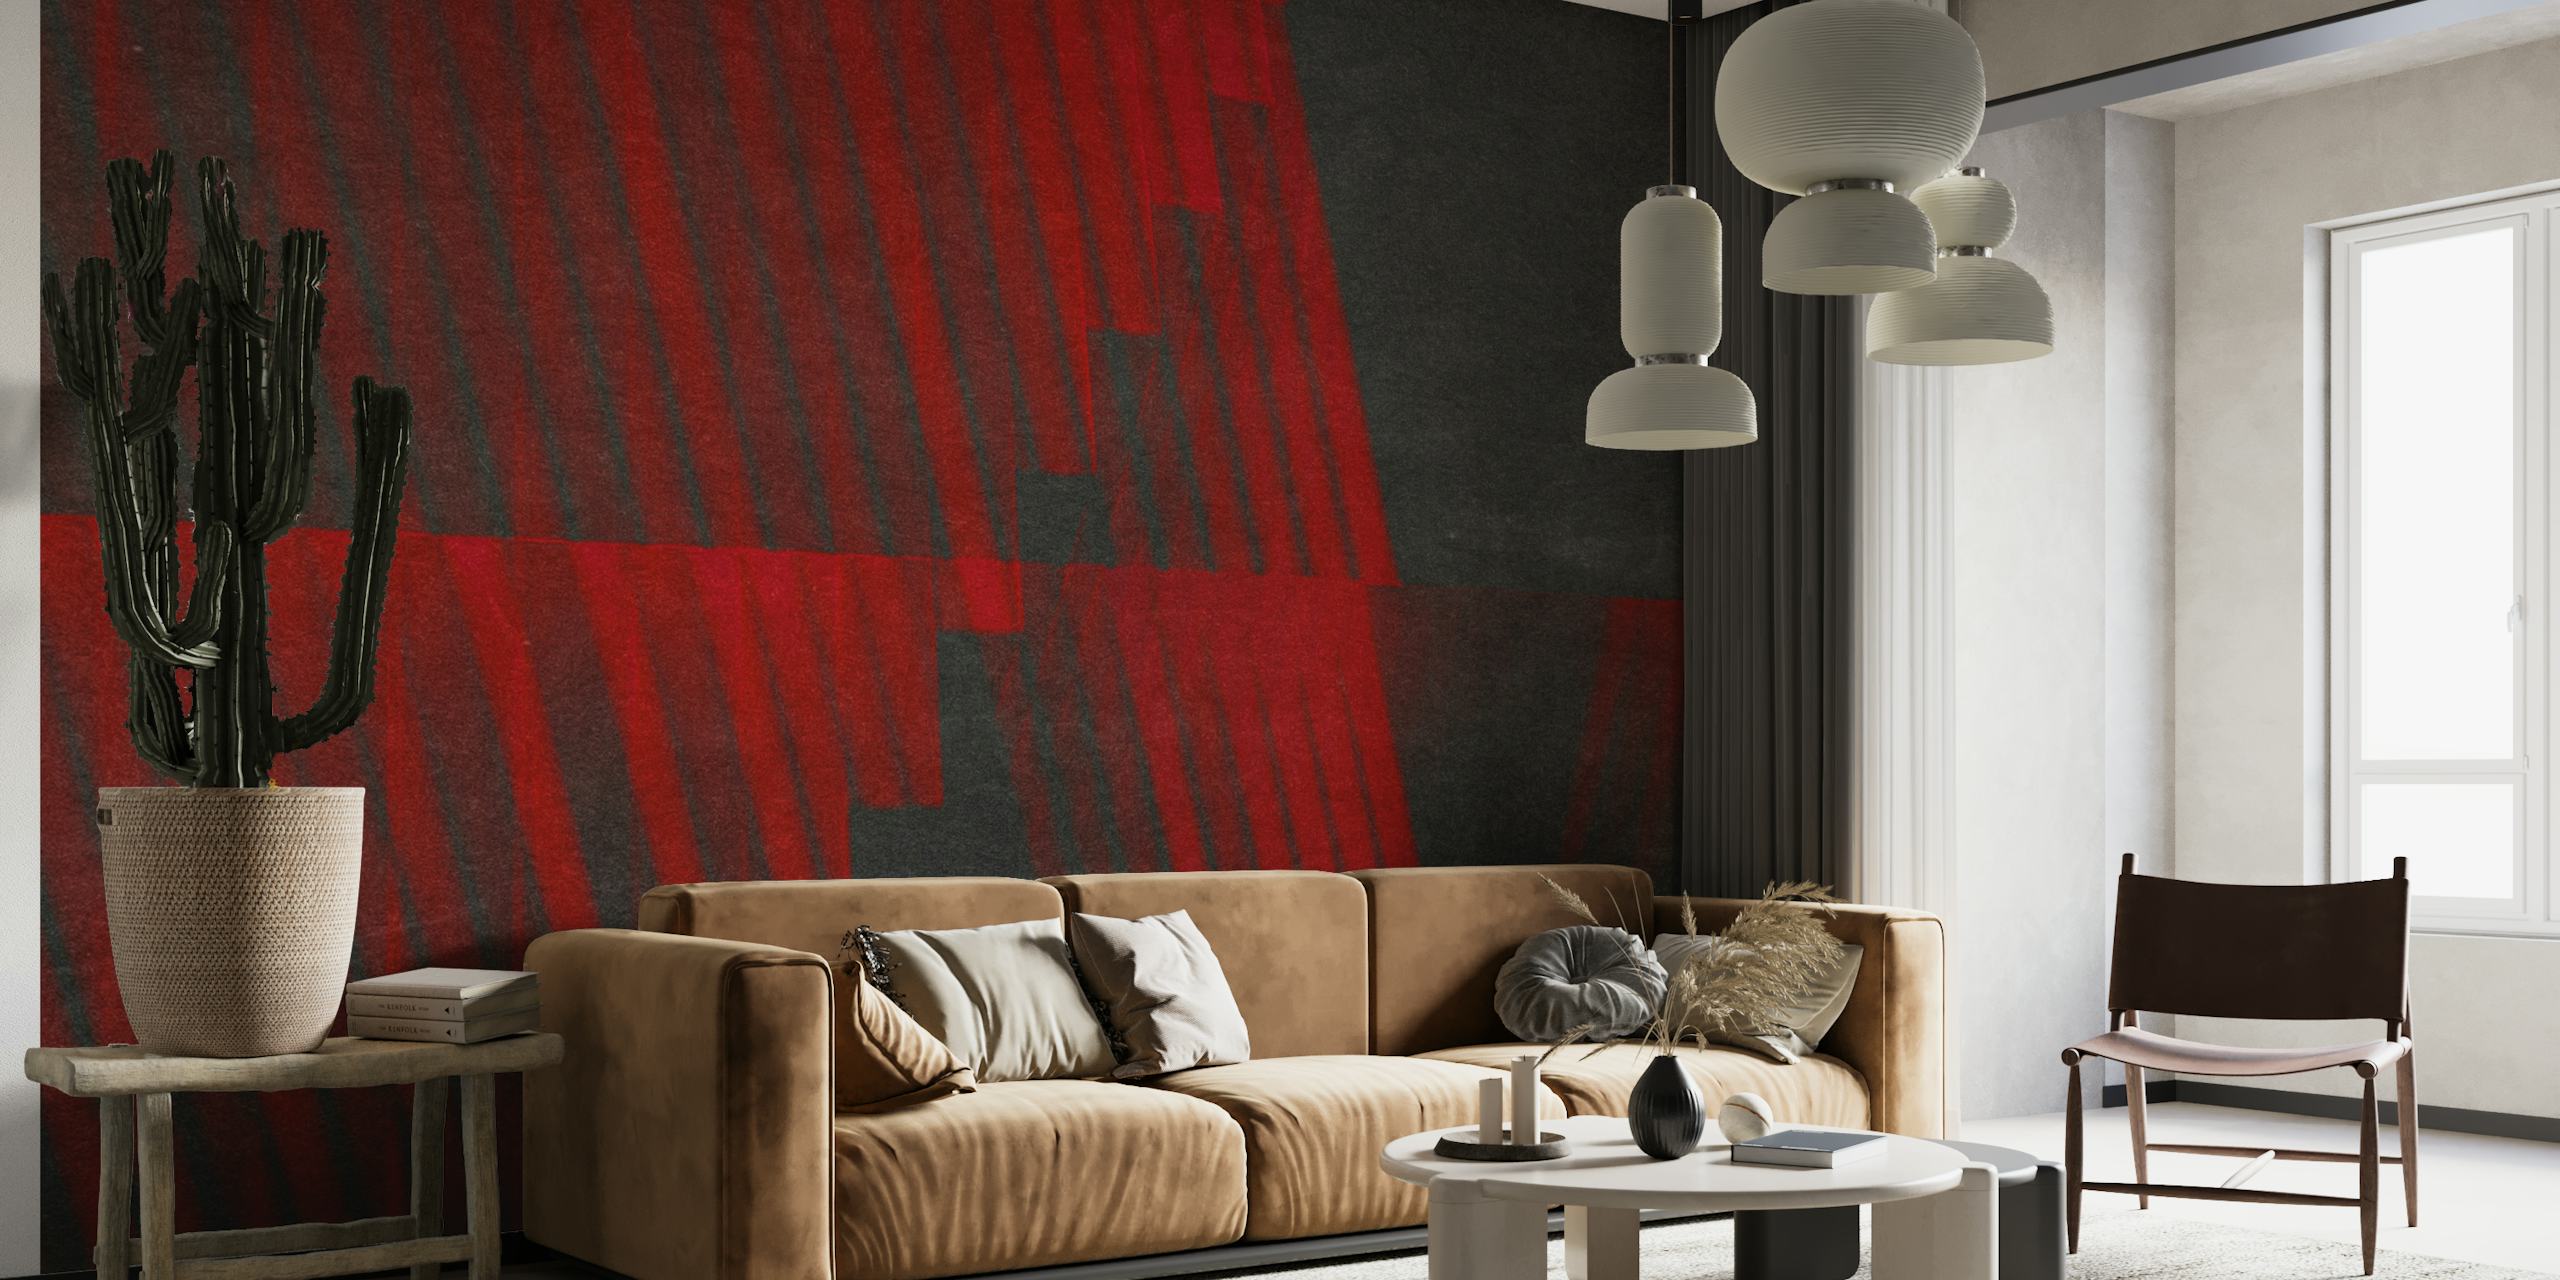 Abstract Rojo y Gris 3 wall mural featuring bold red lines on a textured gray background